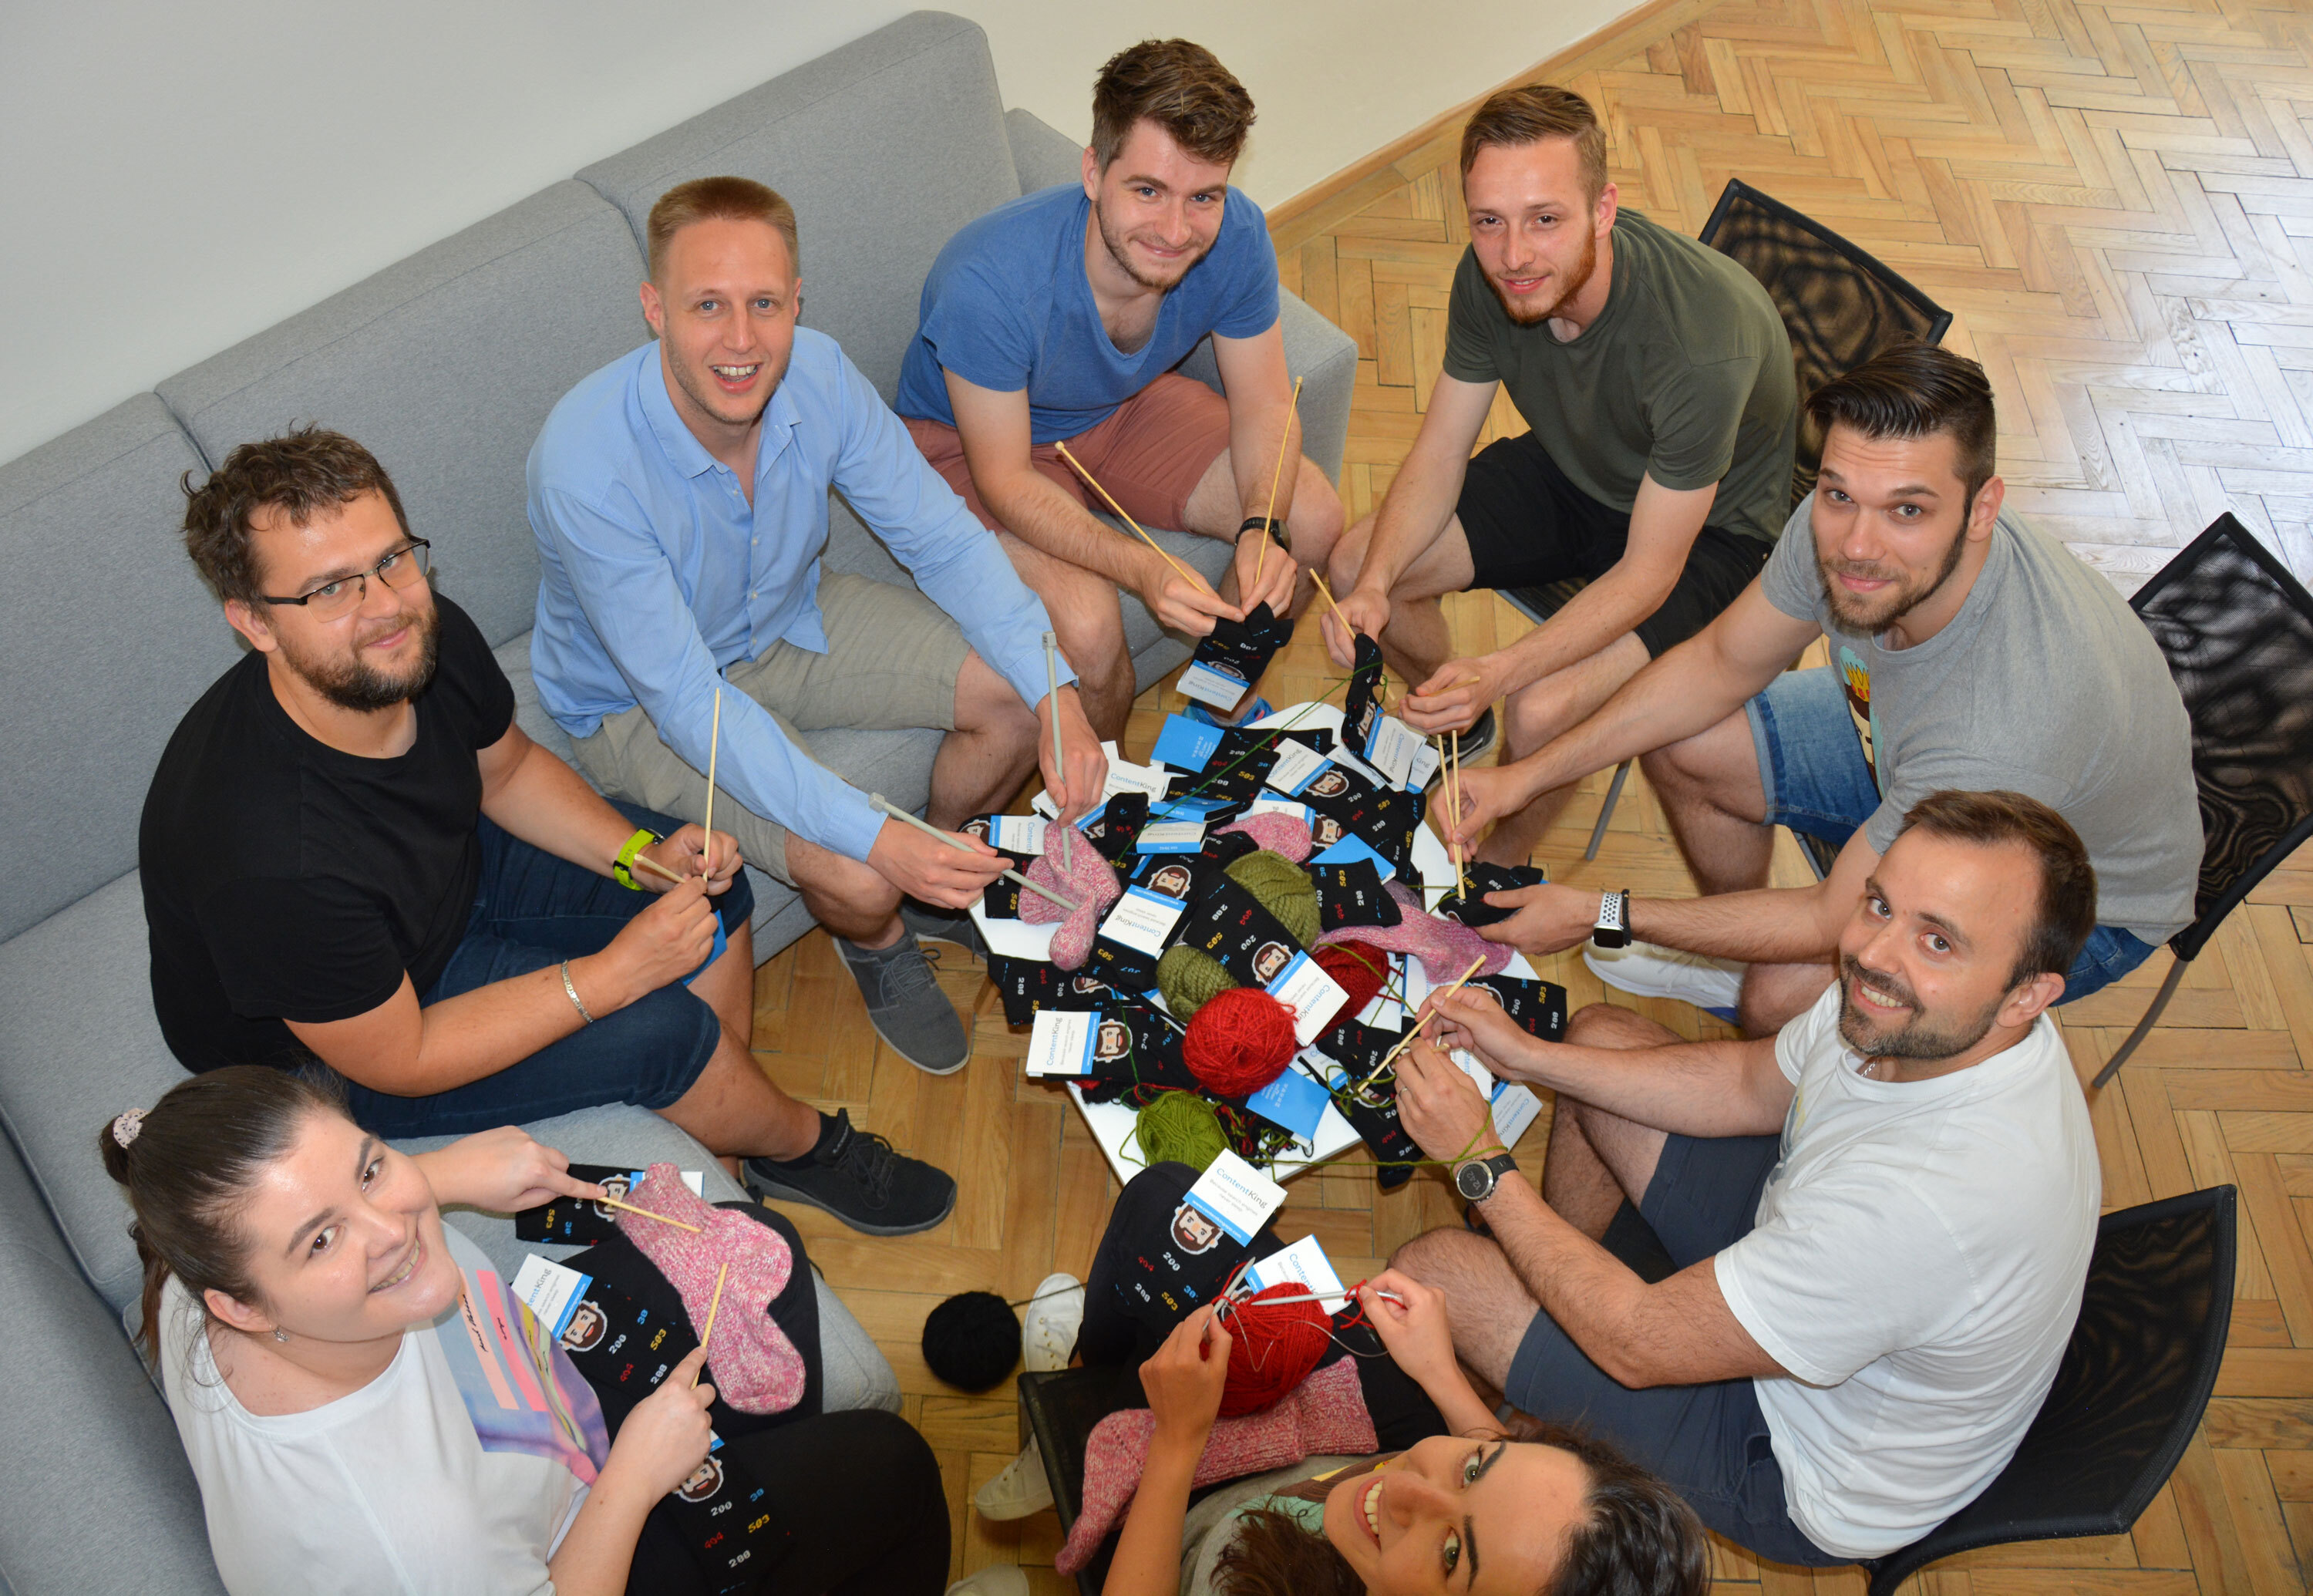 The ContentKing team preparing #seosocks to send out